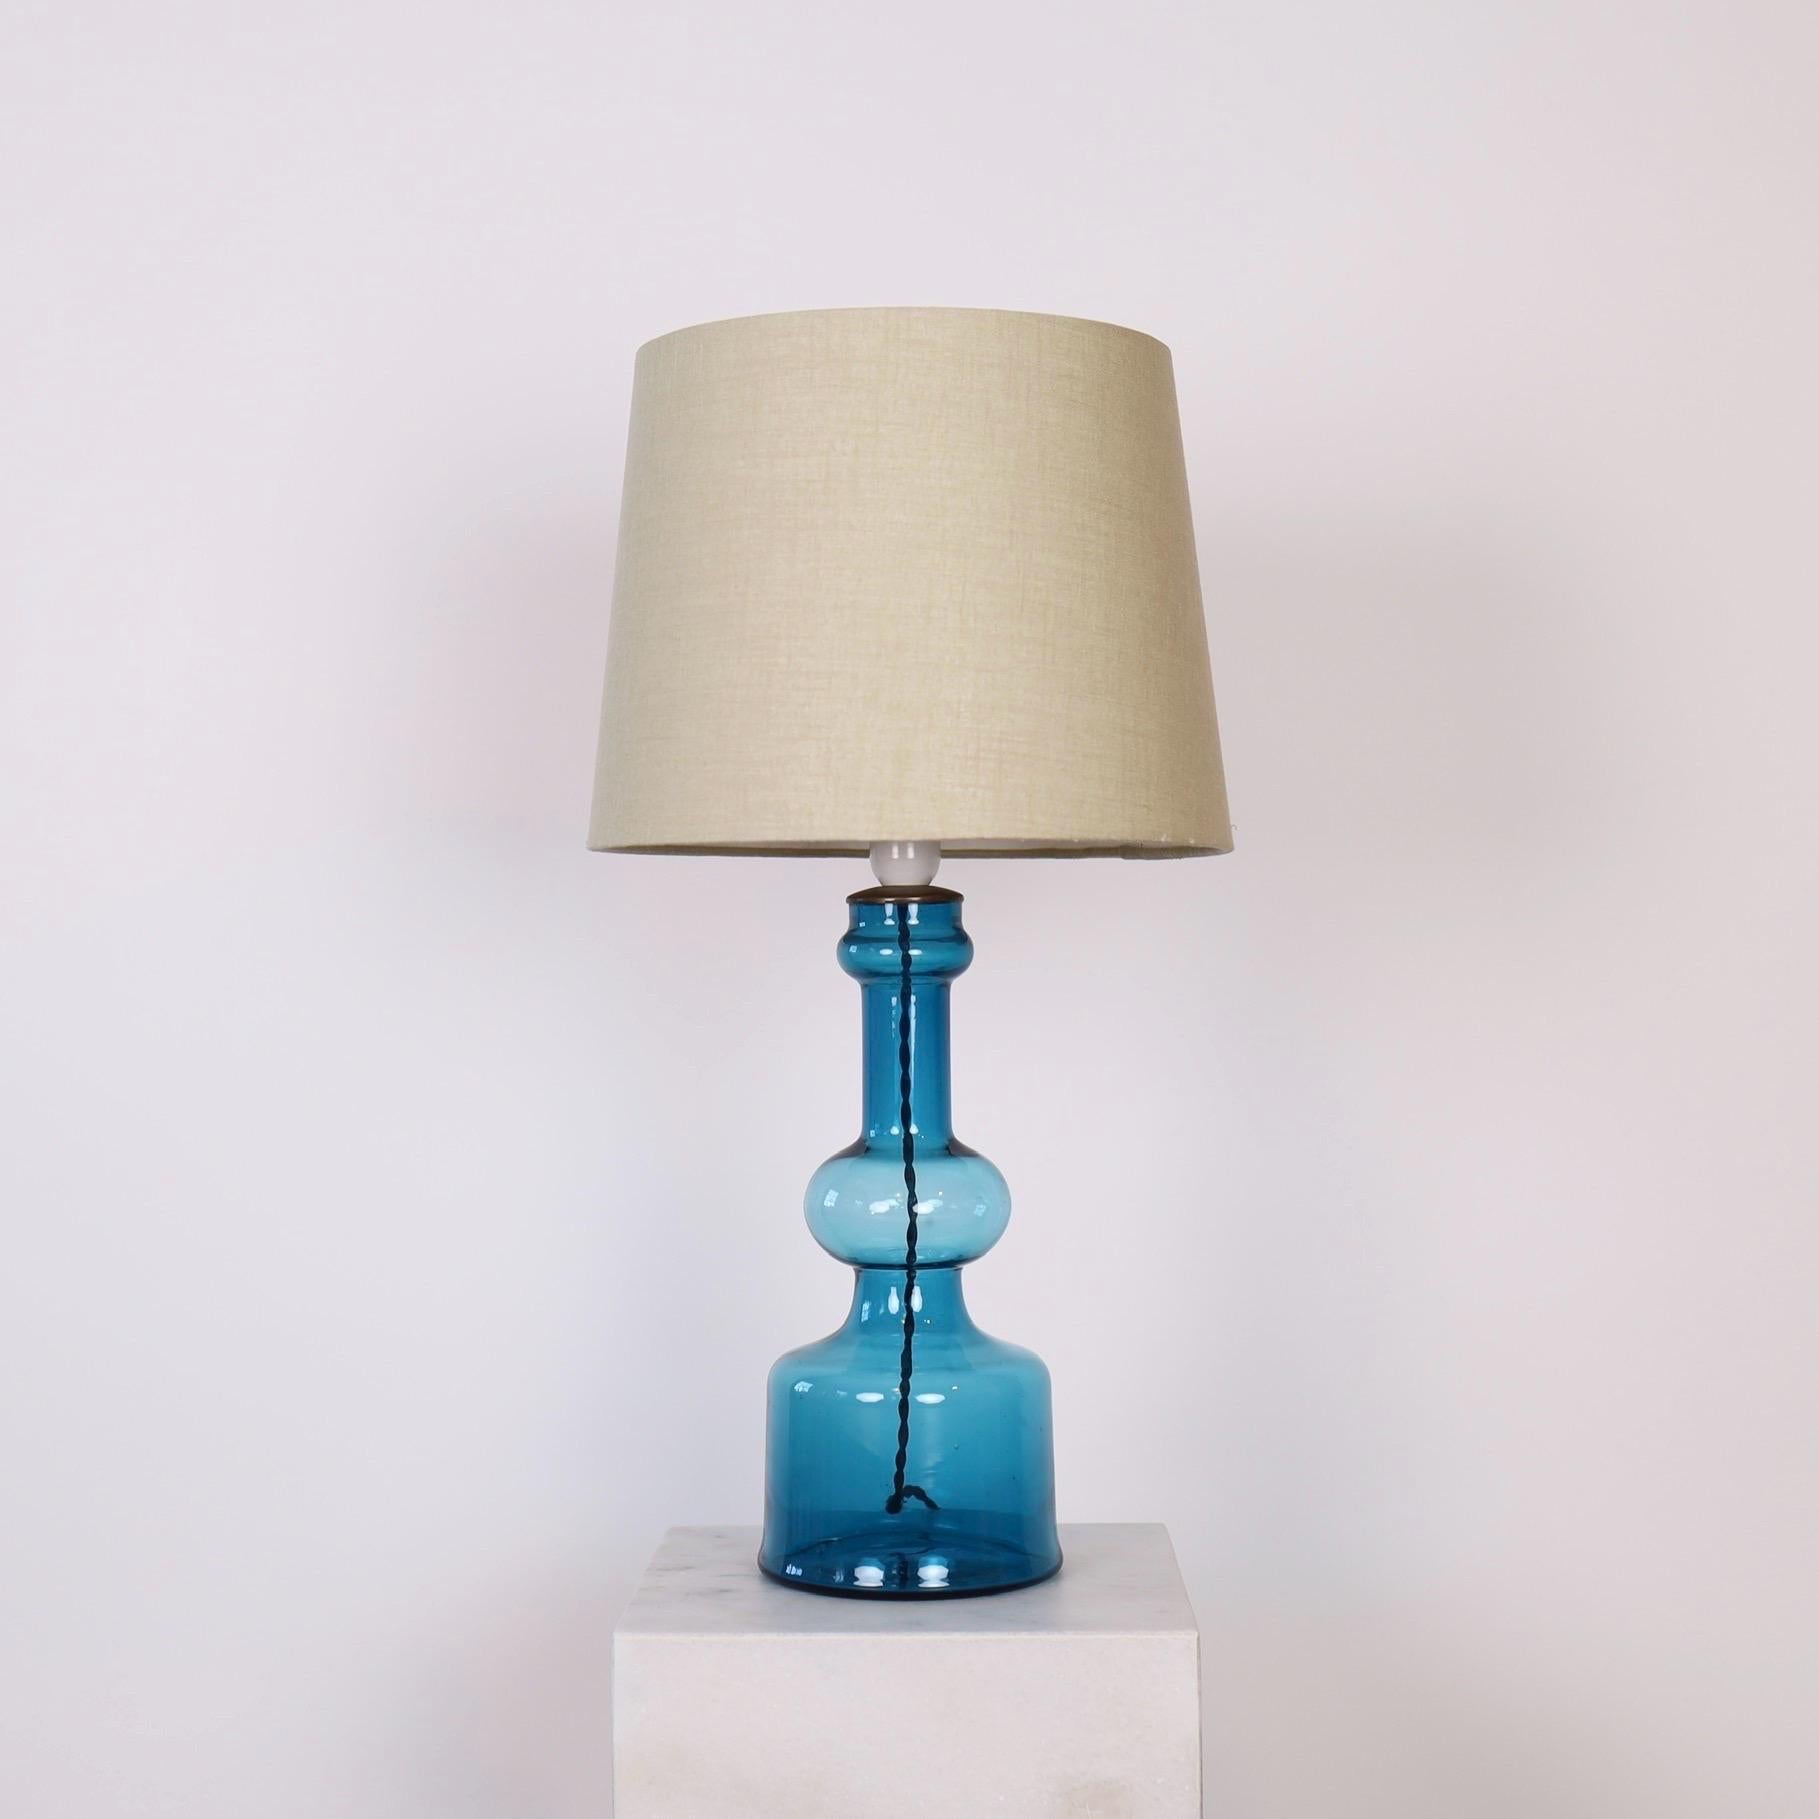 A light blue glass desk lamp designed by Lisbeth Brams in 1966 for Fog & Mørup. The eye-catching piece is one of three in her trio for Fog & Mørup. We have the trio available. 

* A light blue, transparent glass table lamp with a brass top and a